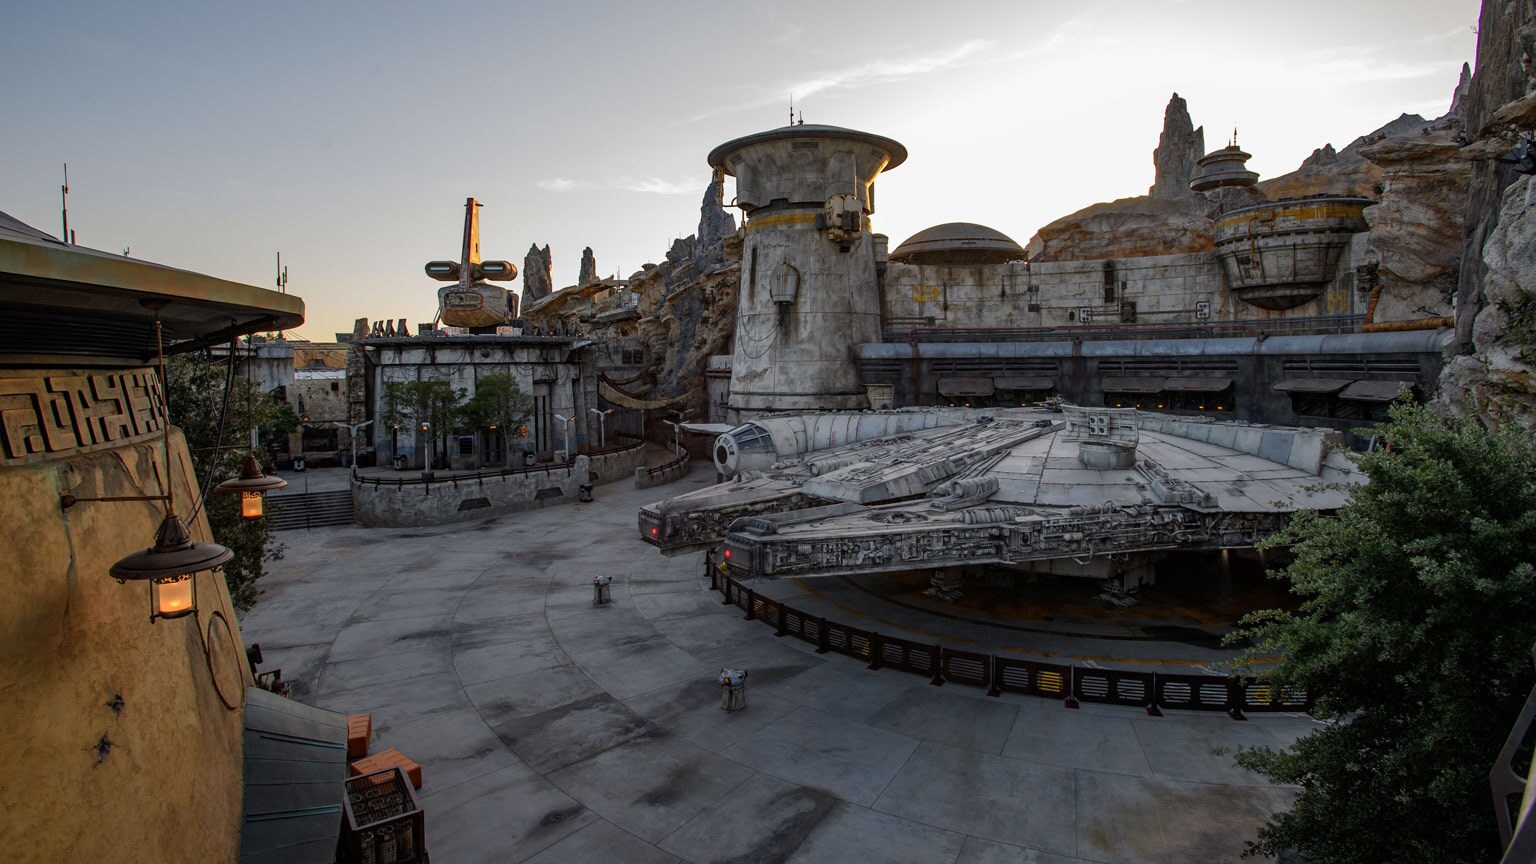 Poll: What Are You Most Excited to Experience at Star Wars: Galaxy’s Edge?